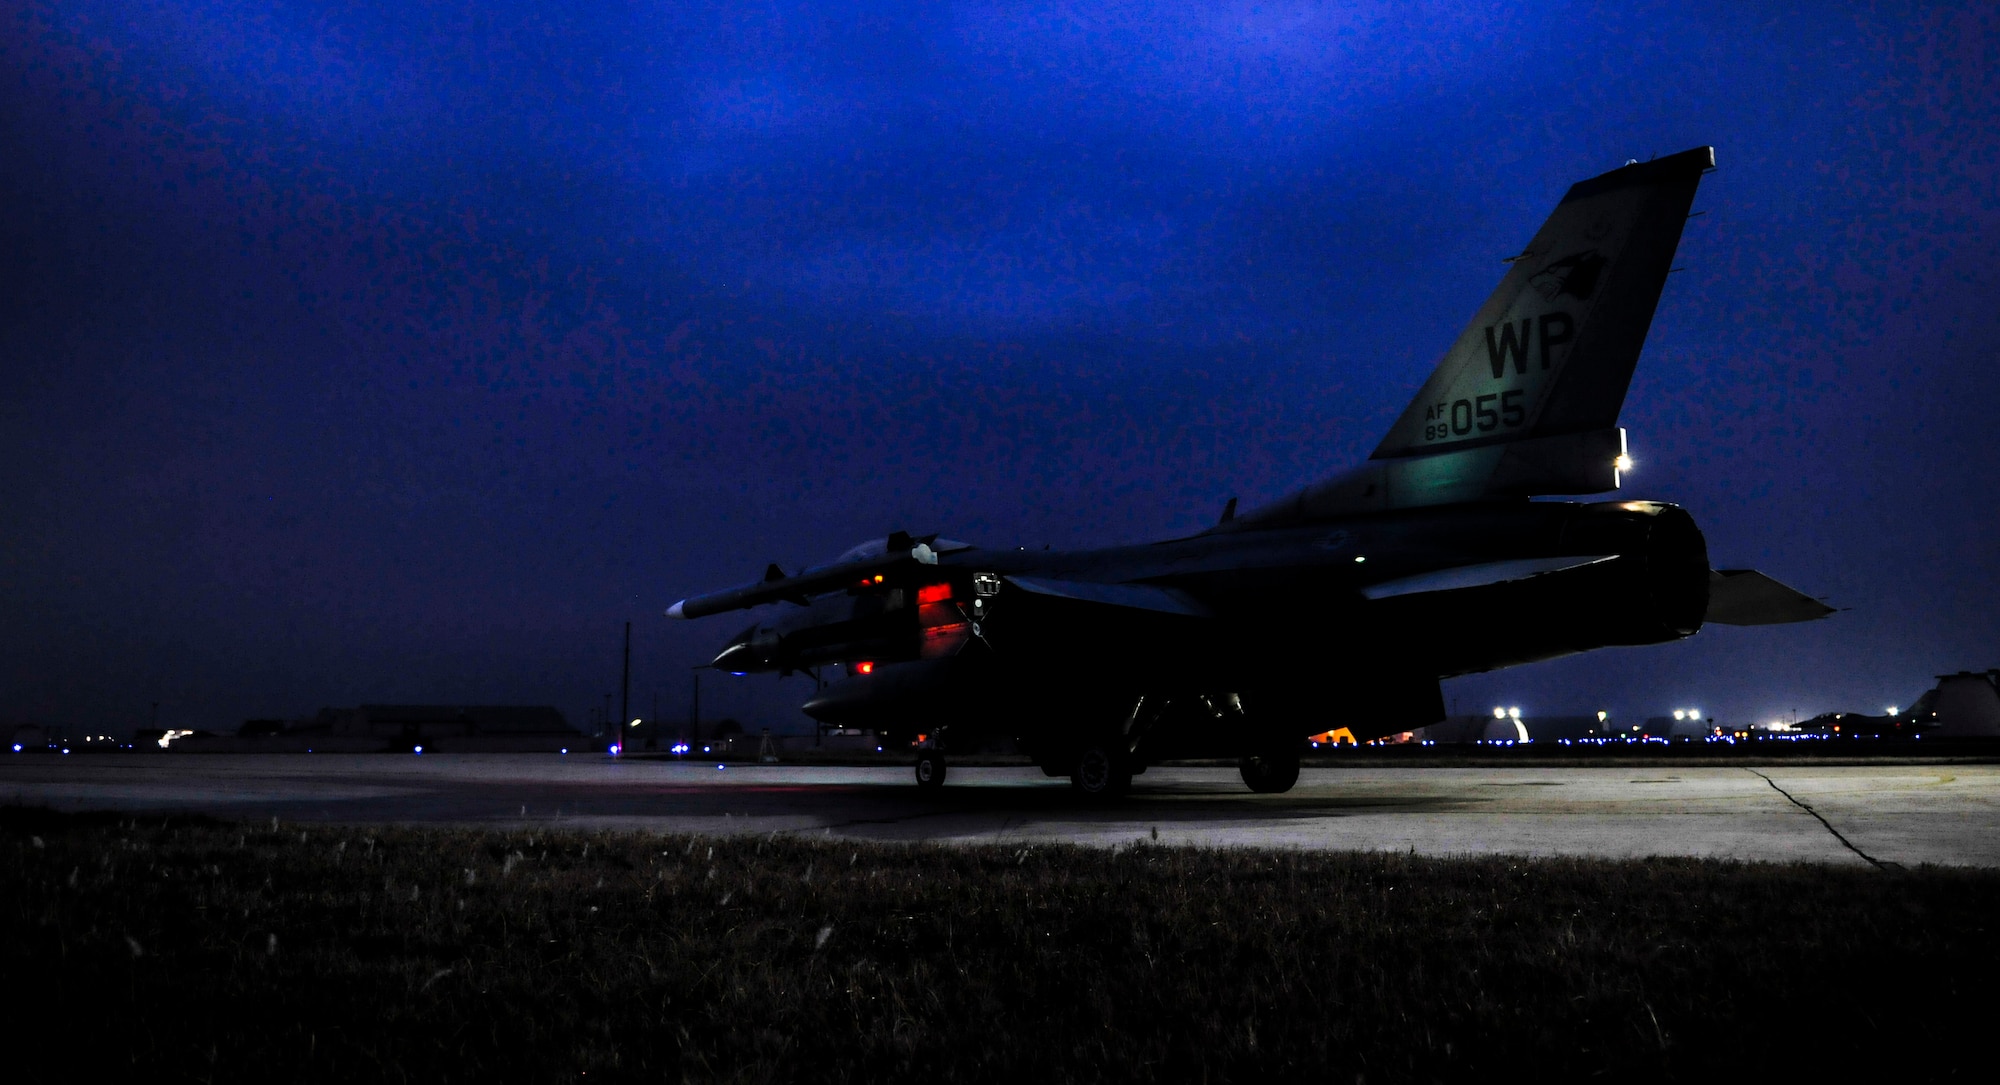 U.S. Air Force Capt. Erik Kitaif, 35th Fighter Squadron pilot, parks an F-16 Fighting Falcon outside of its hanger bay at Kunsan Air Base, Republic of Korea, Dec. 4, 2016. Airmen at Kunsan train to employ airpower to deter aggression, preserve the Armistice and defend the ROK. (U.S. Air Force photo by Senior Airman Colville McFee/Released)